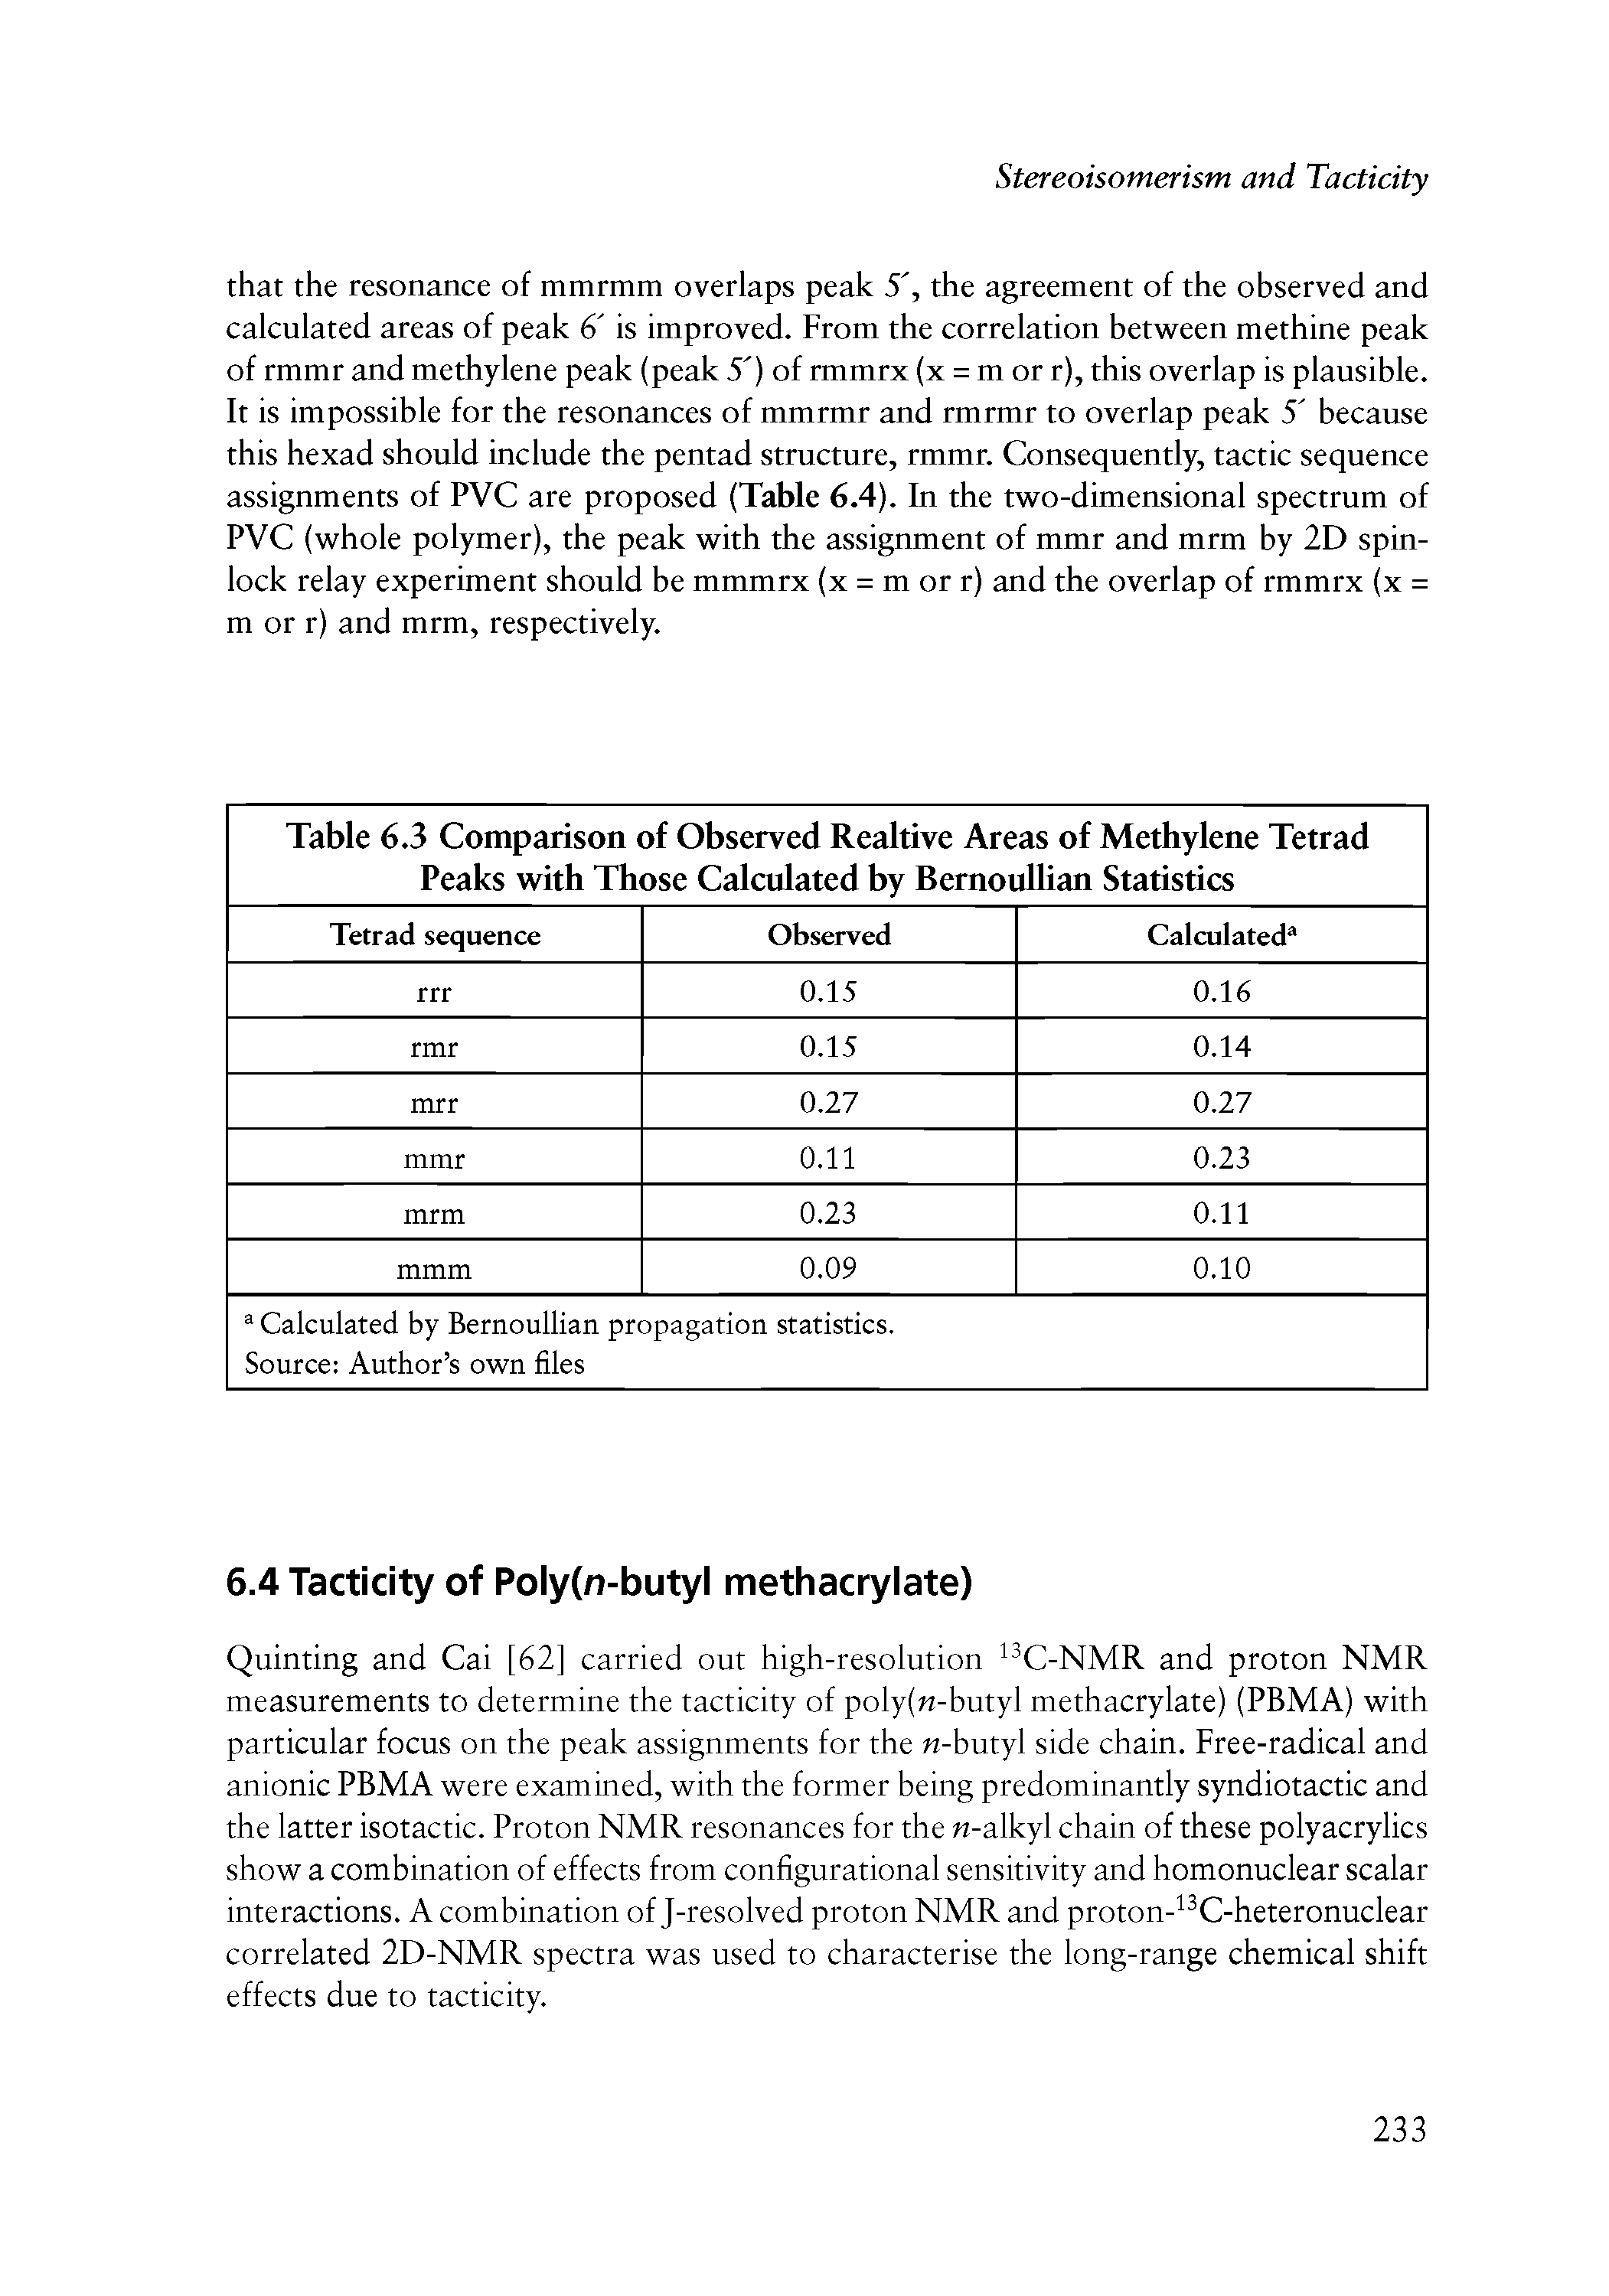 Table 6.3 Comparison of Observed Realtive Areas of Methylene Tetrad Peaks with Those Calculated by Bemoullian Statistics ...